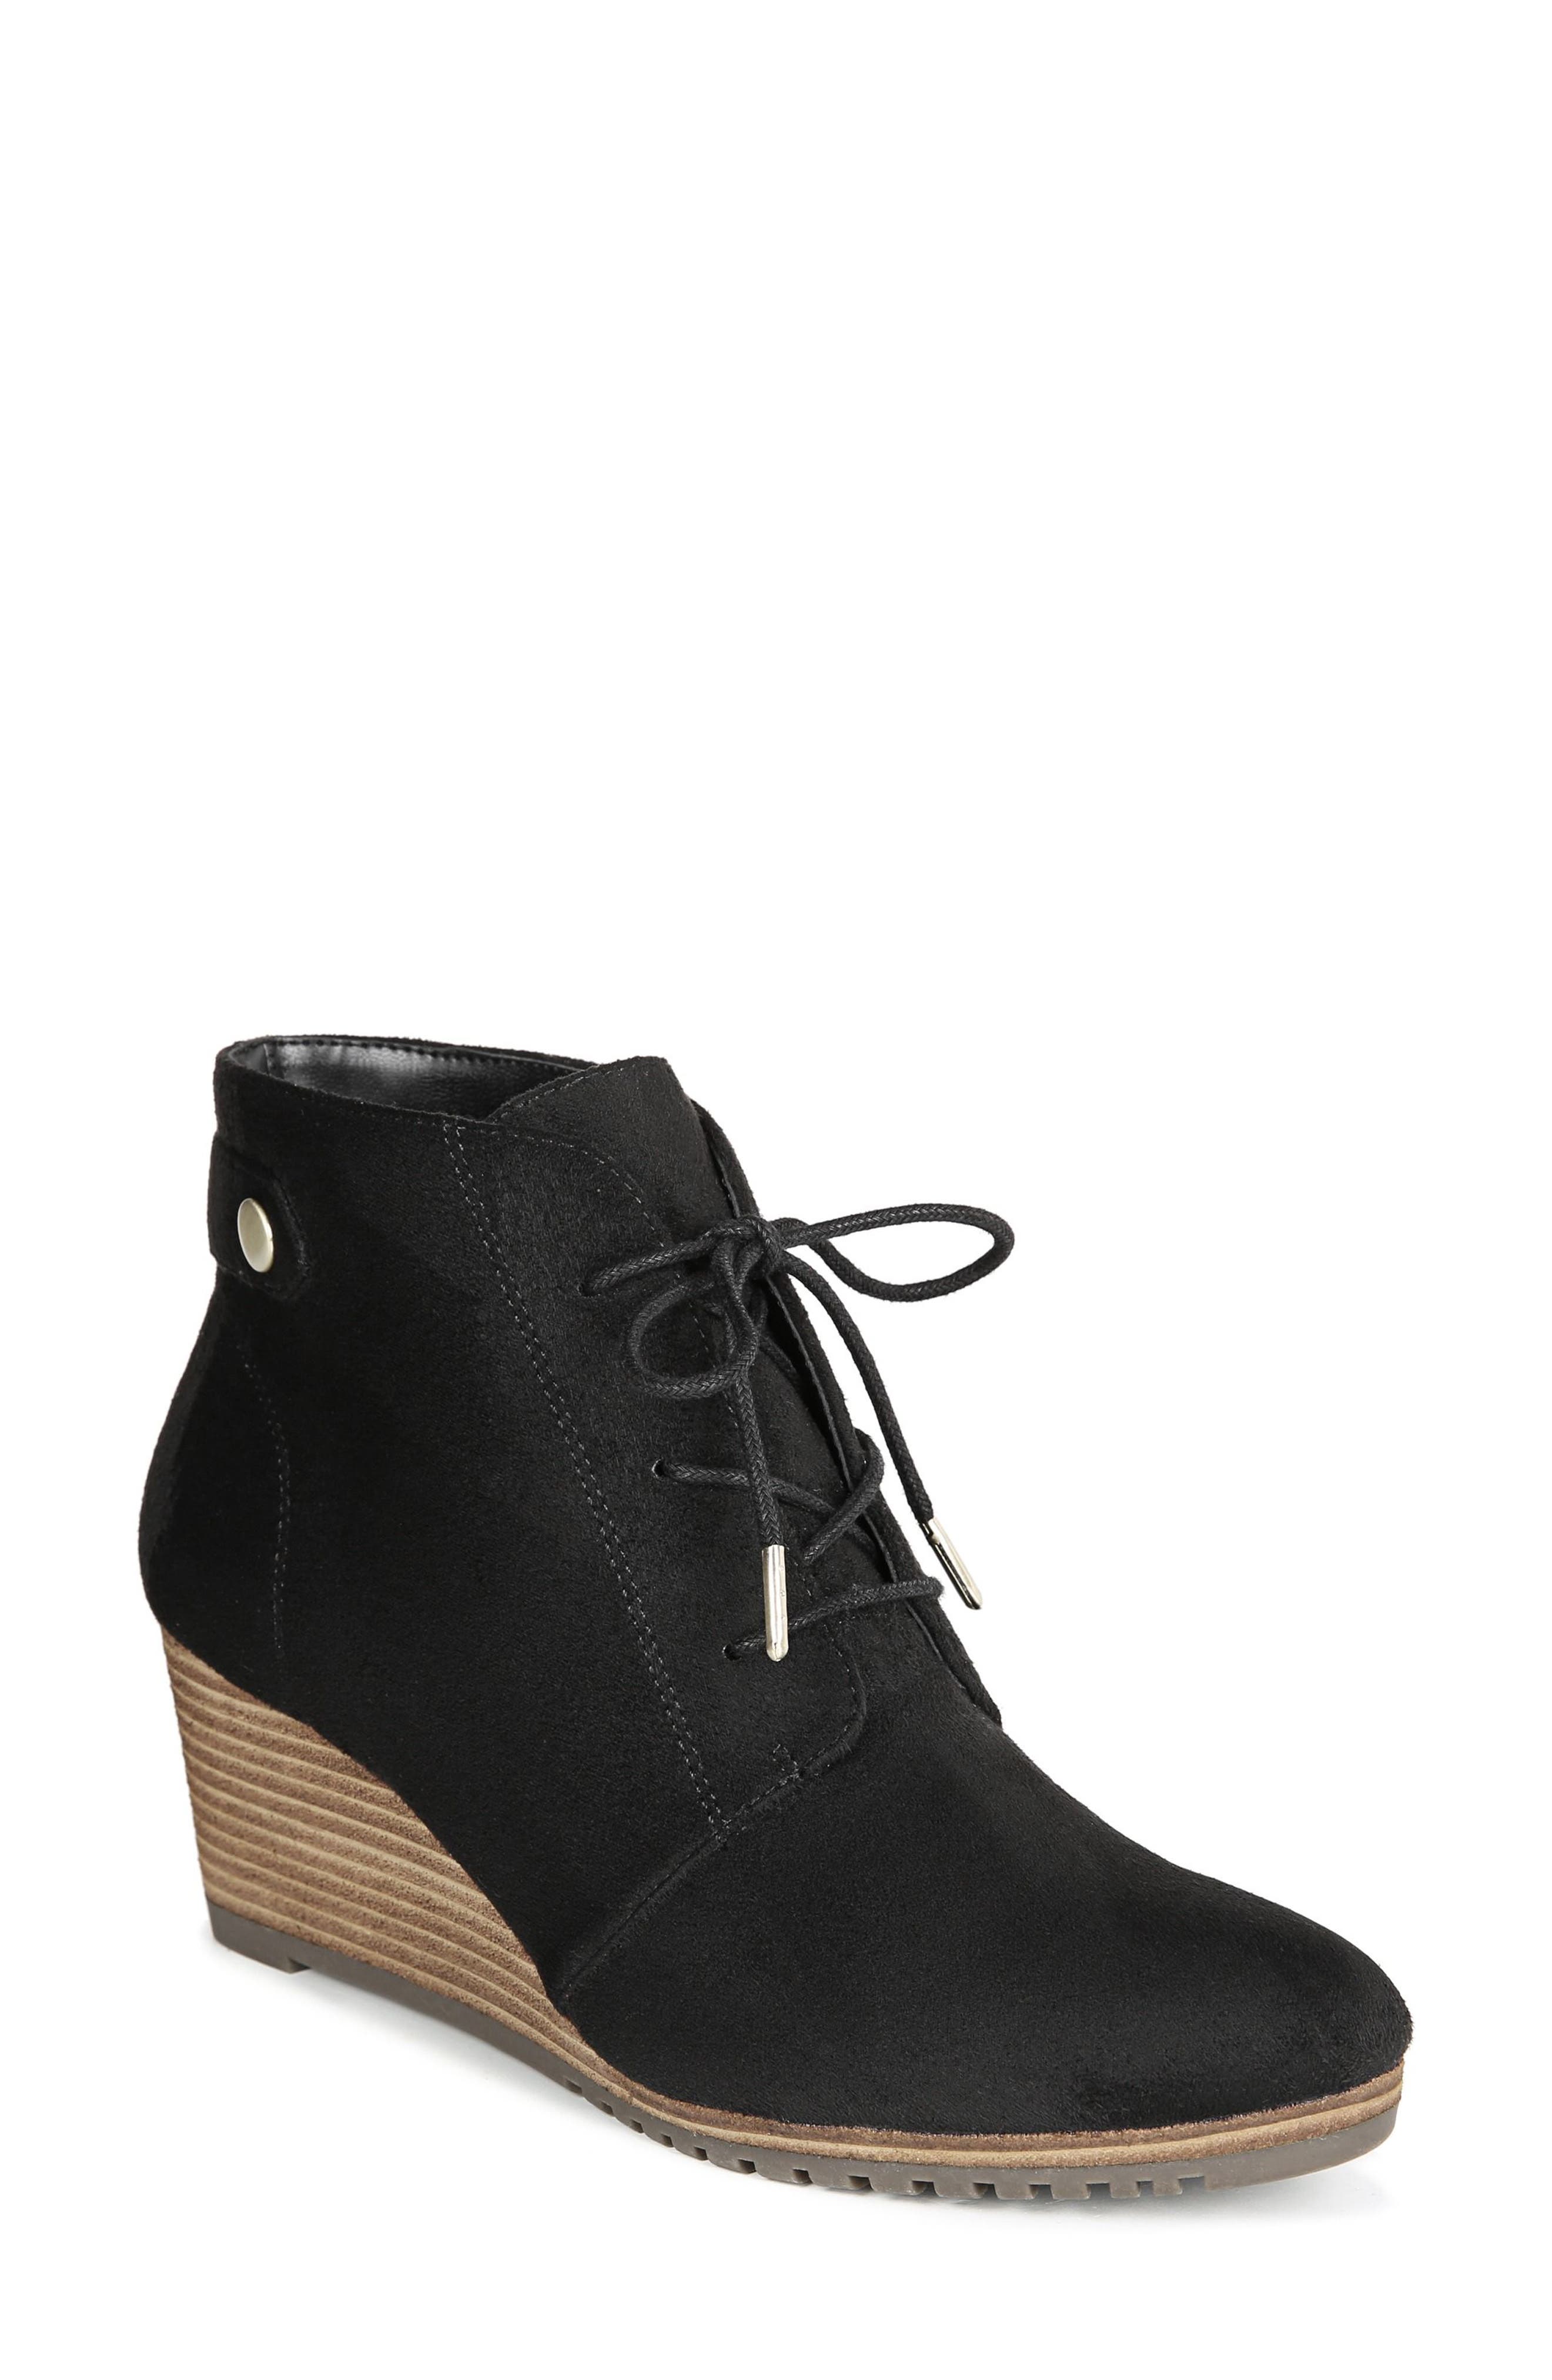 UPC 736703211541 product image for Women's Dr. Scholl's Conquer Wedge Bootie, Size 9 M - Black | upcitemdb.com